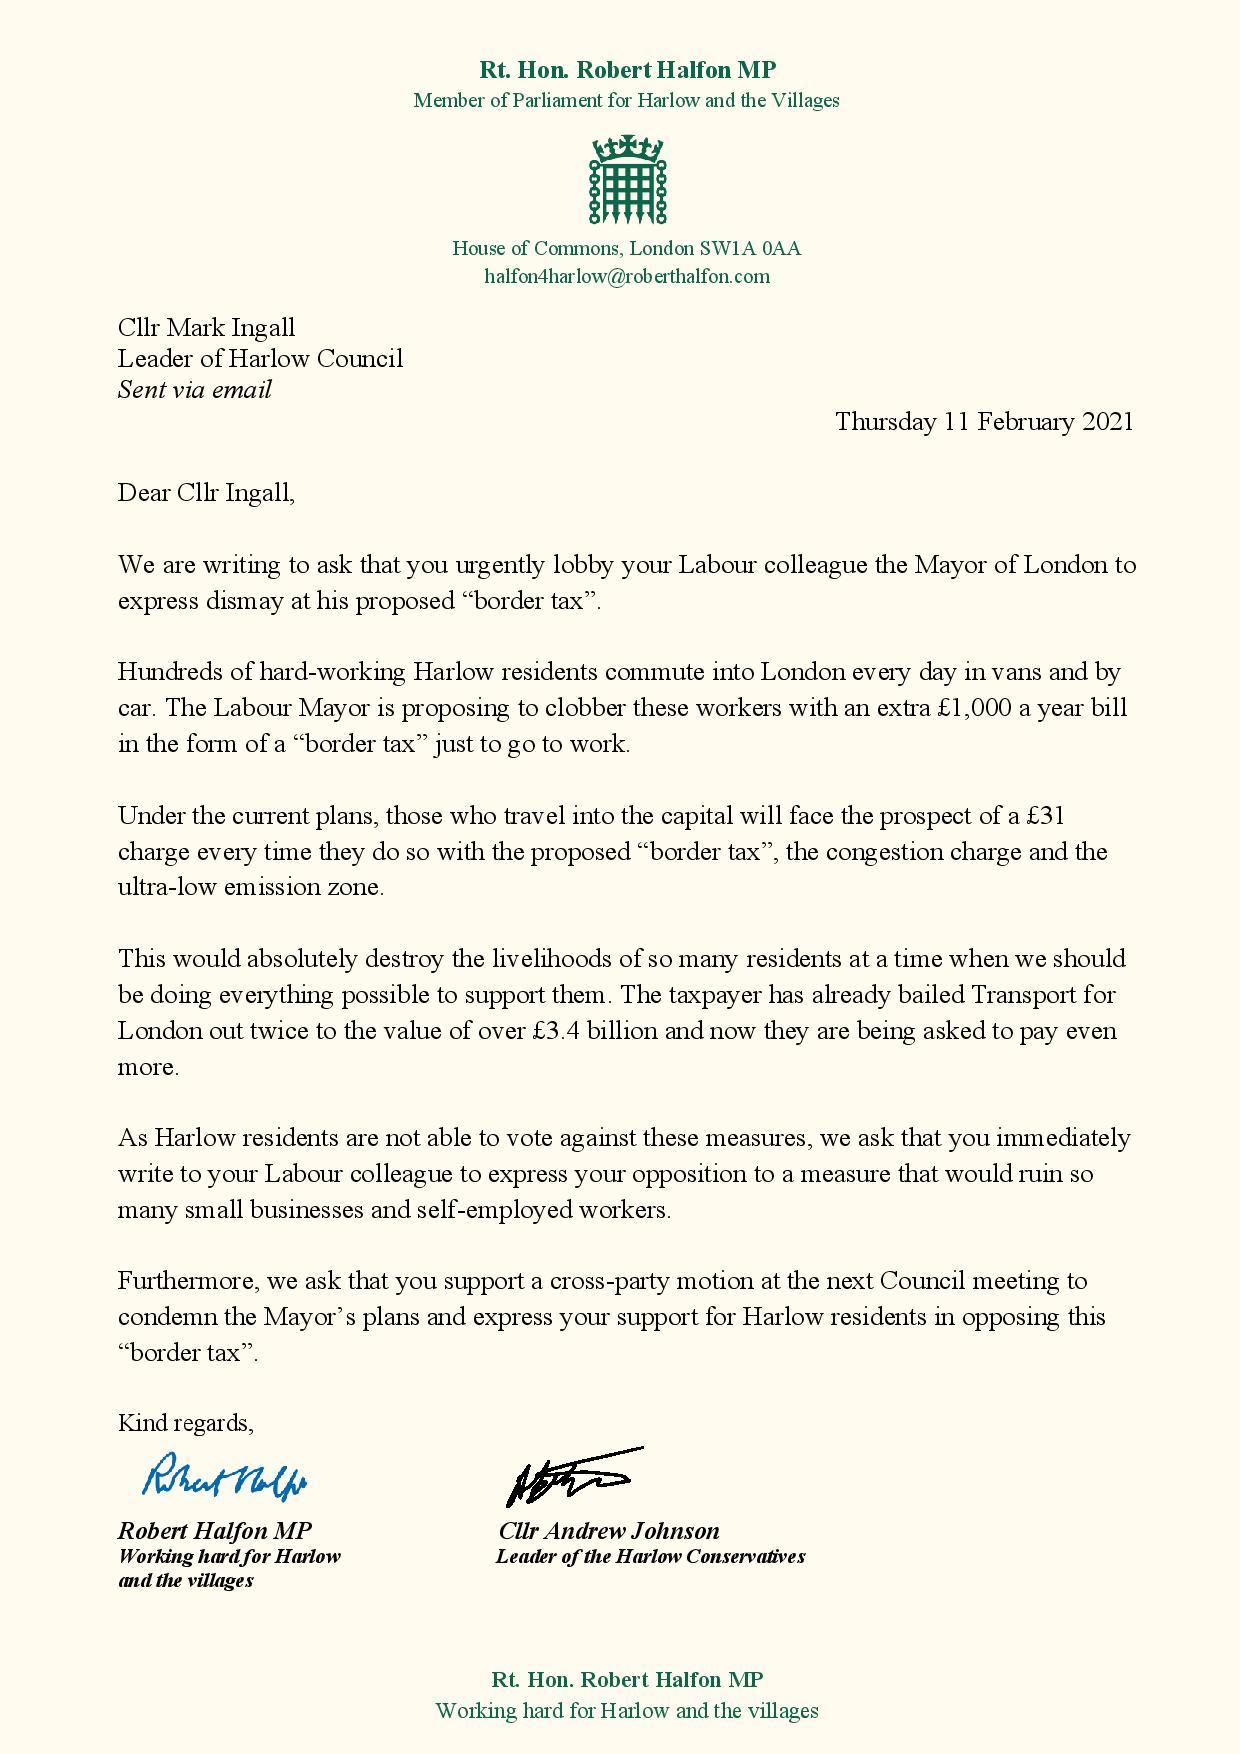 The letter written to Cllr Ingall.